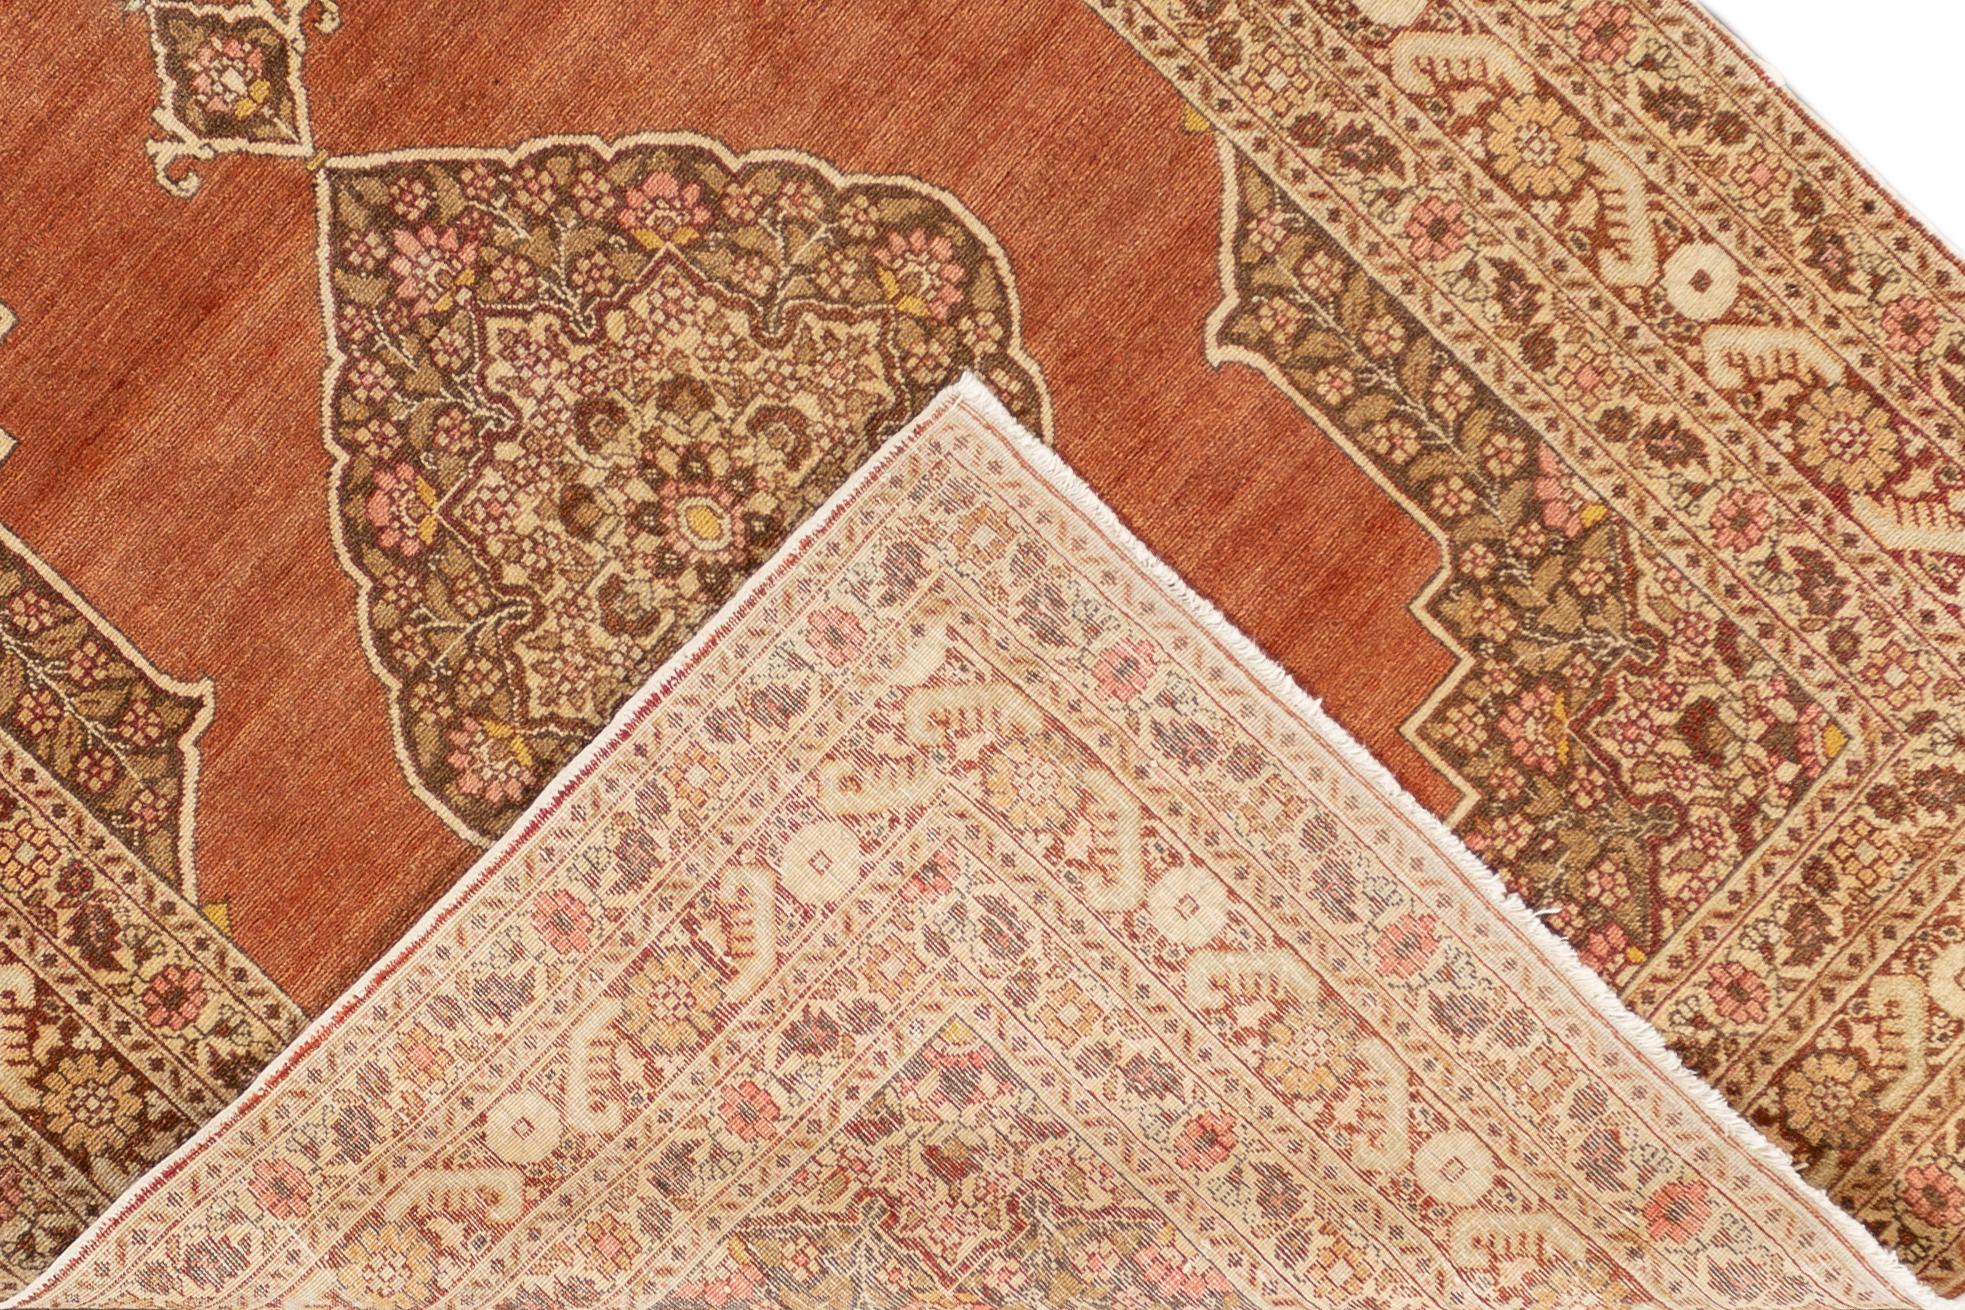 Early 20th century Scatter Tabriz rug. Measures: 4'1